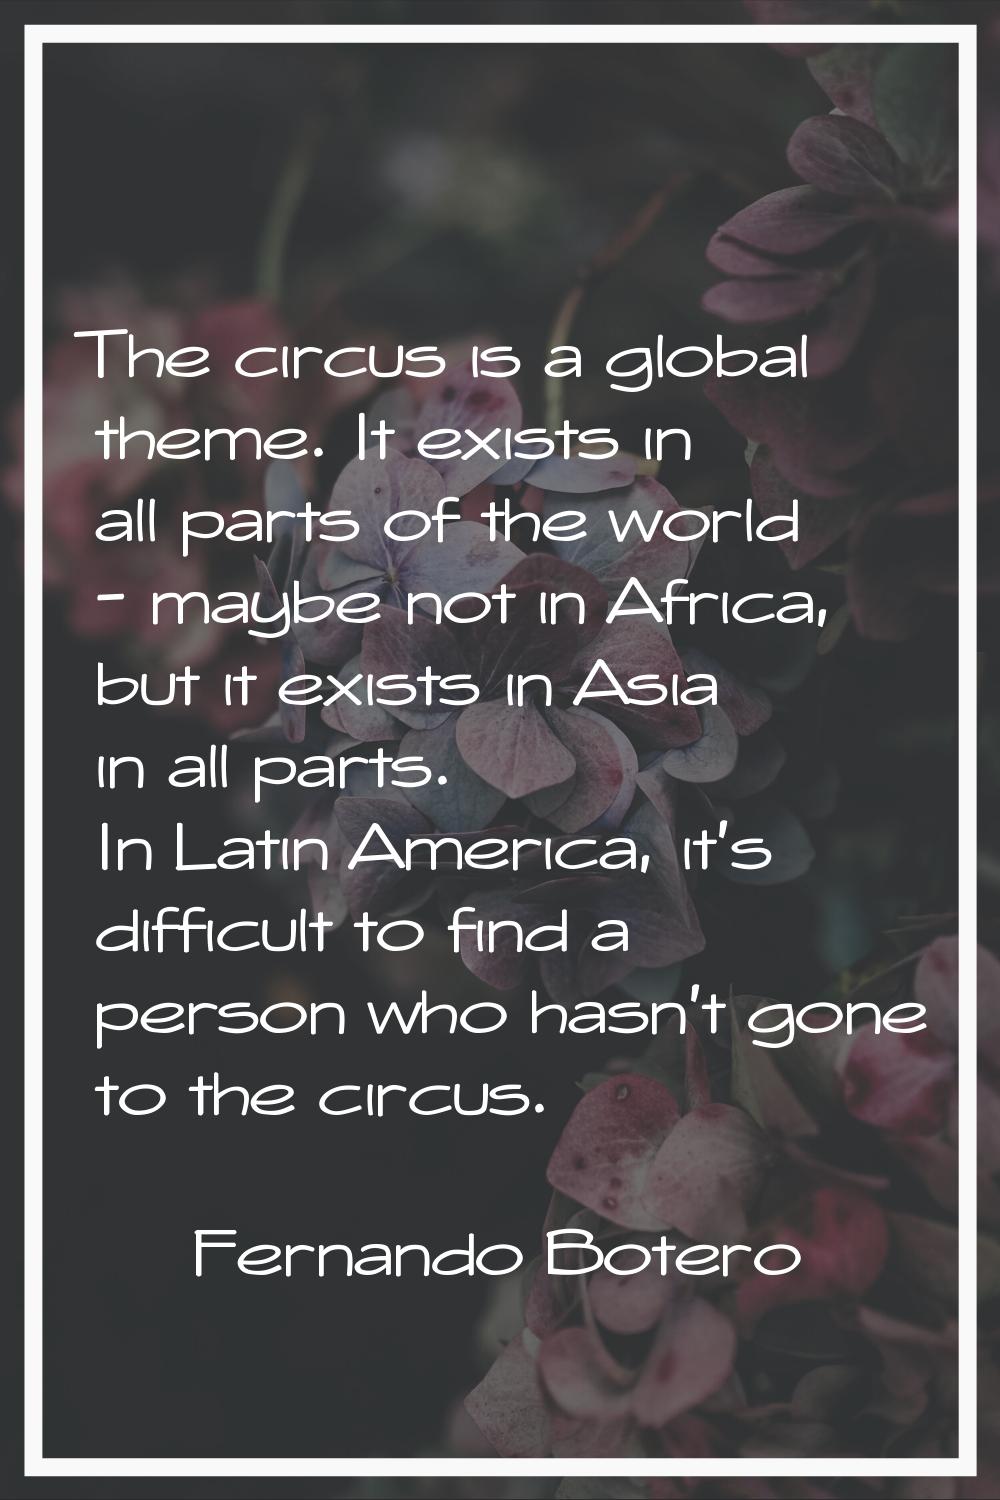 The circus is a global theme. It exists in all parts of the world - maybe not in Africa, but it exi